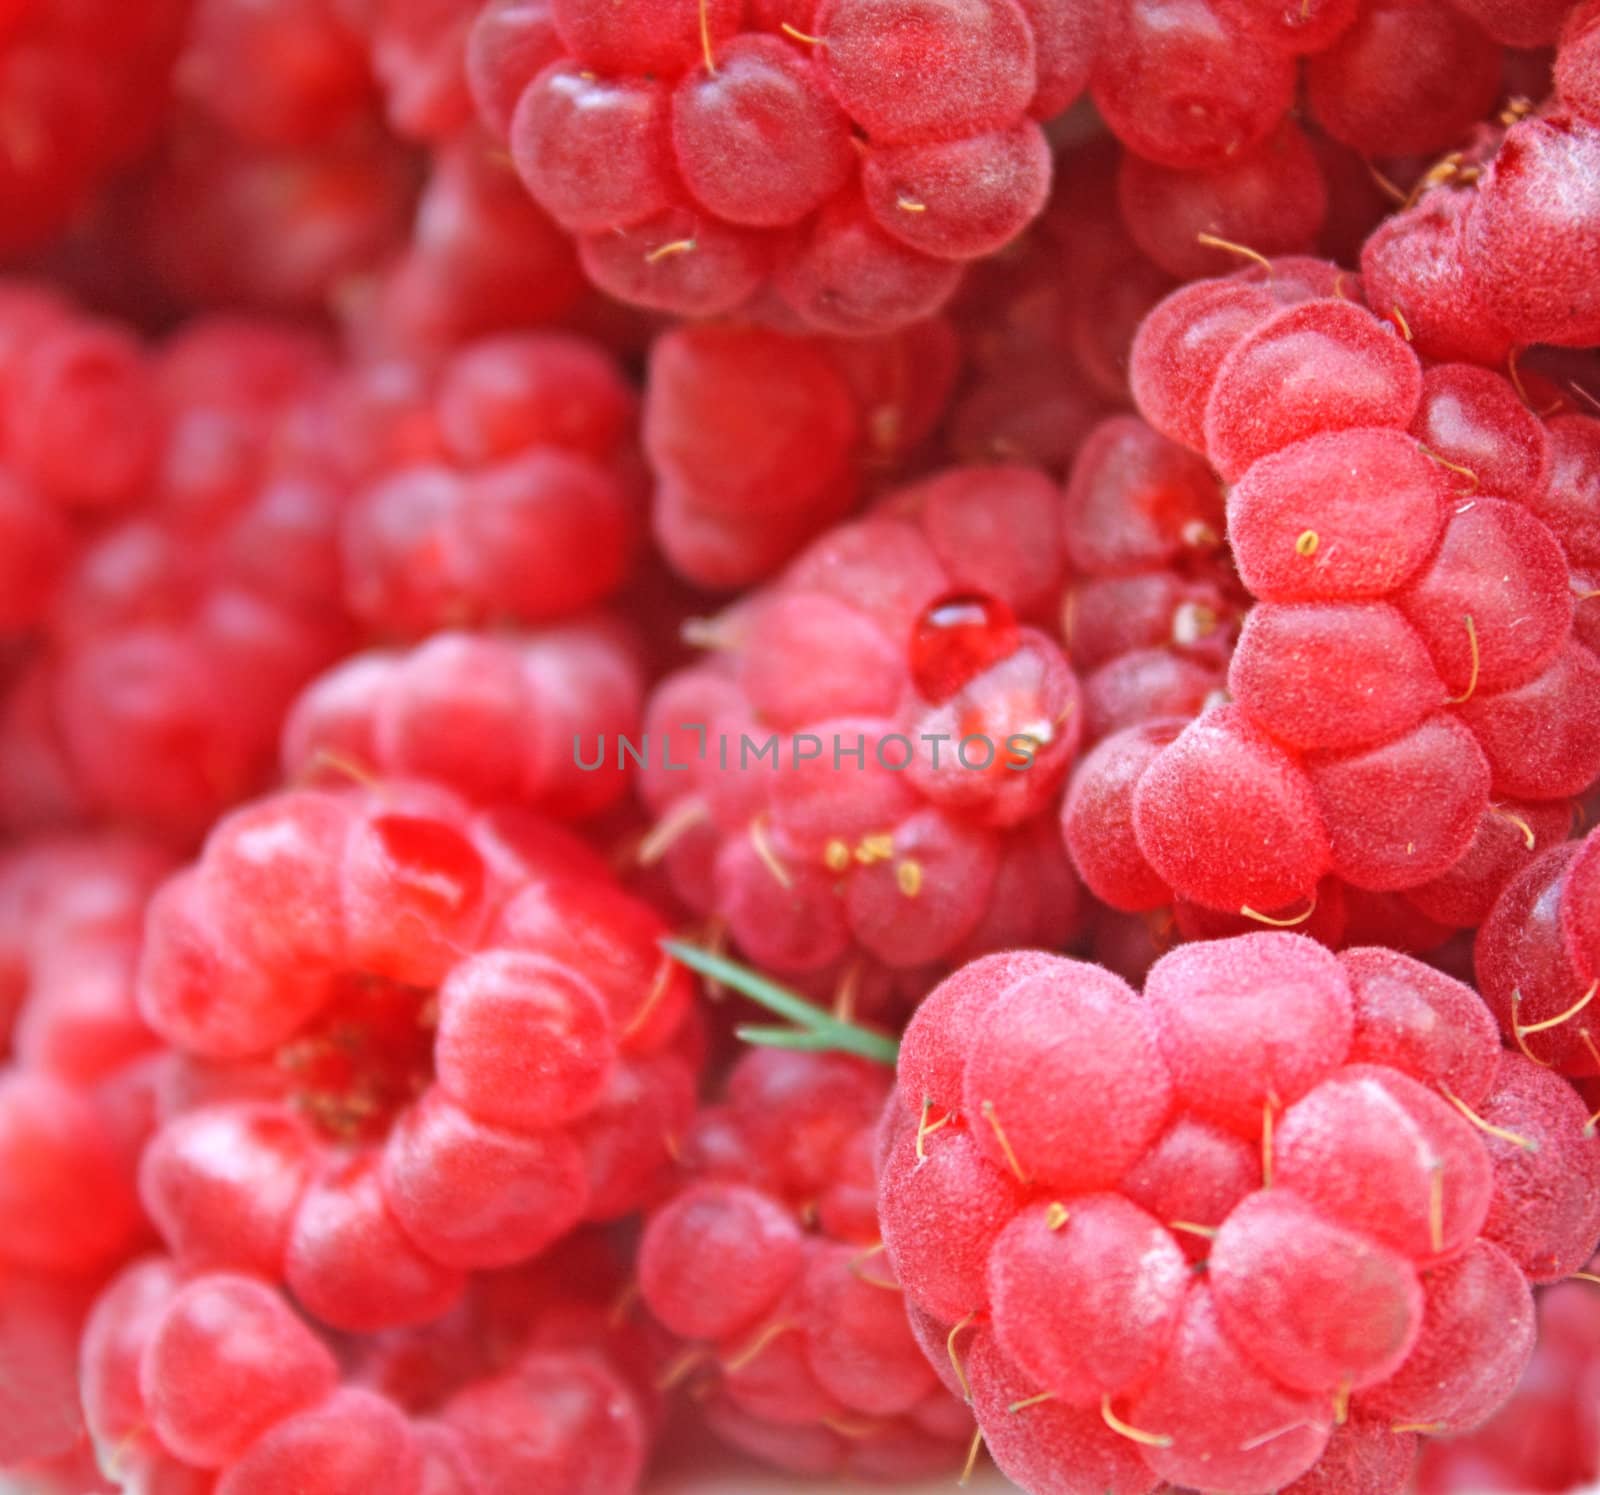 Close up of the red juicy raspberries